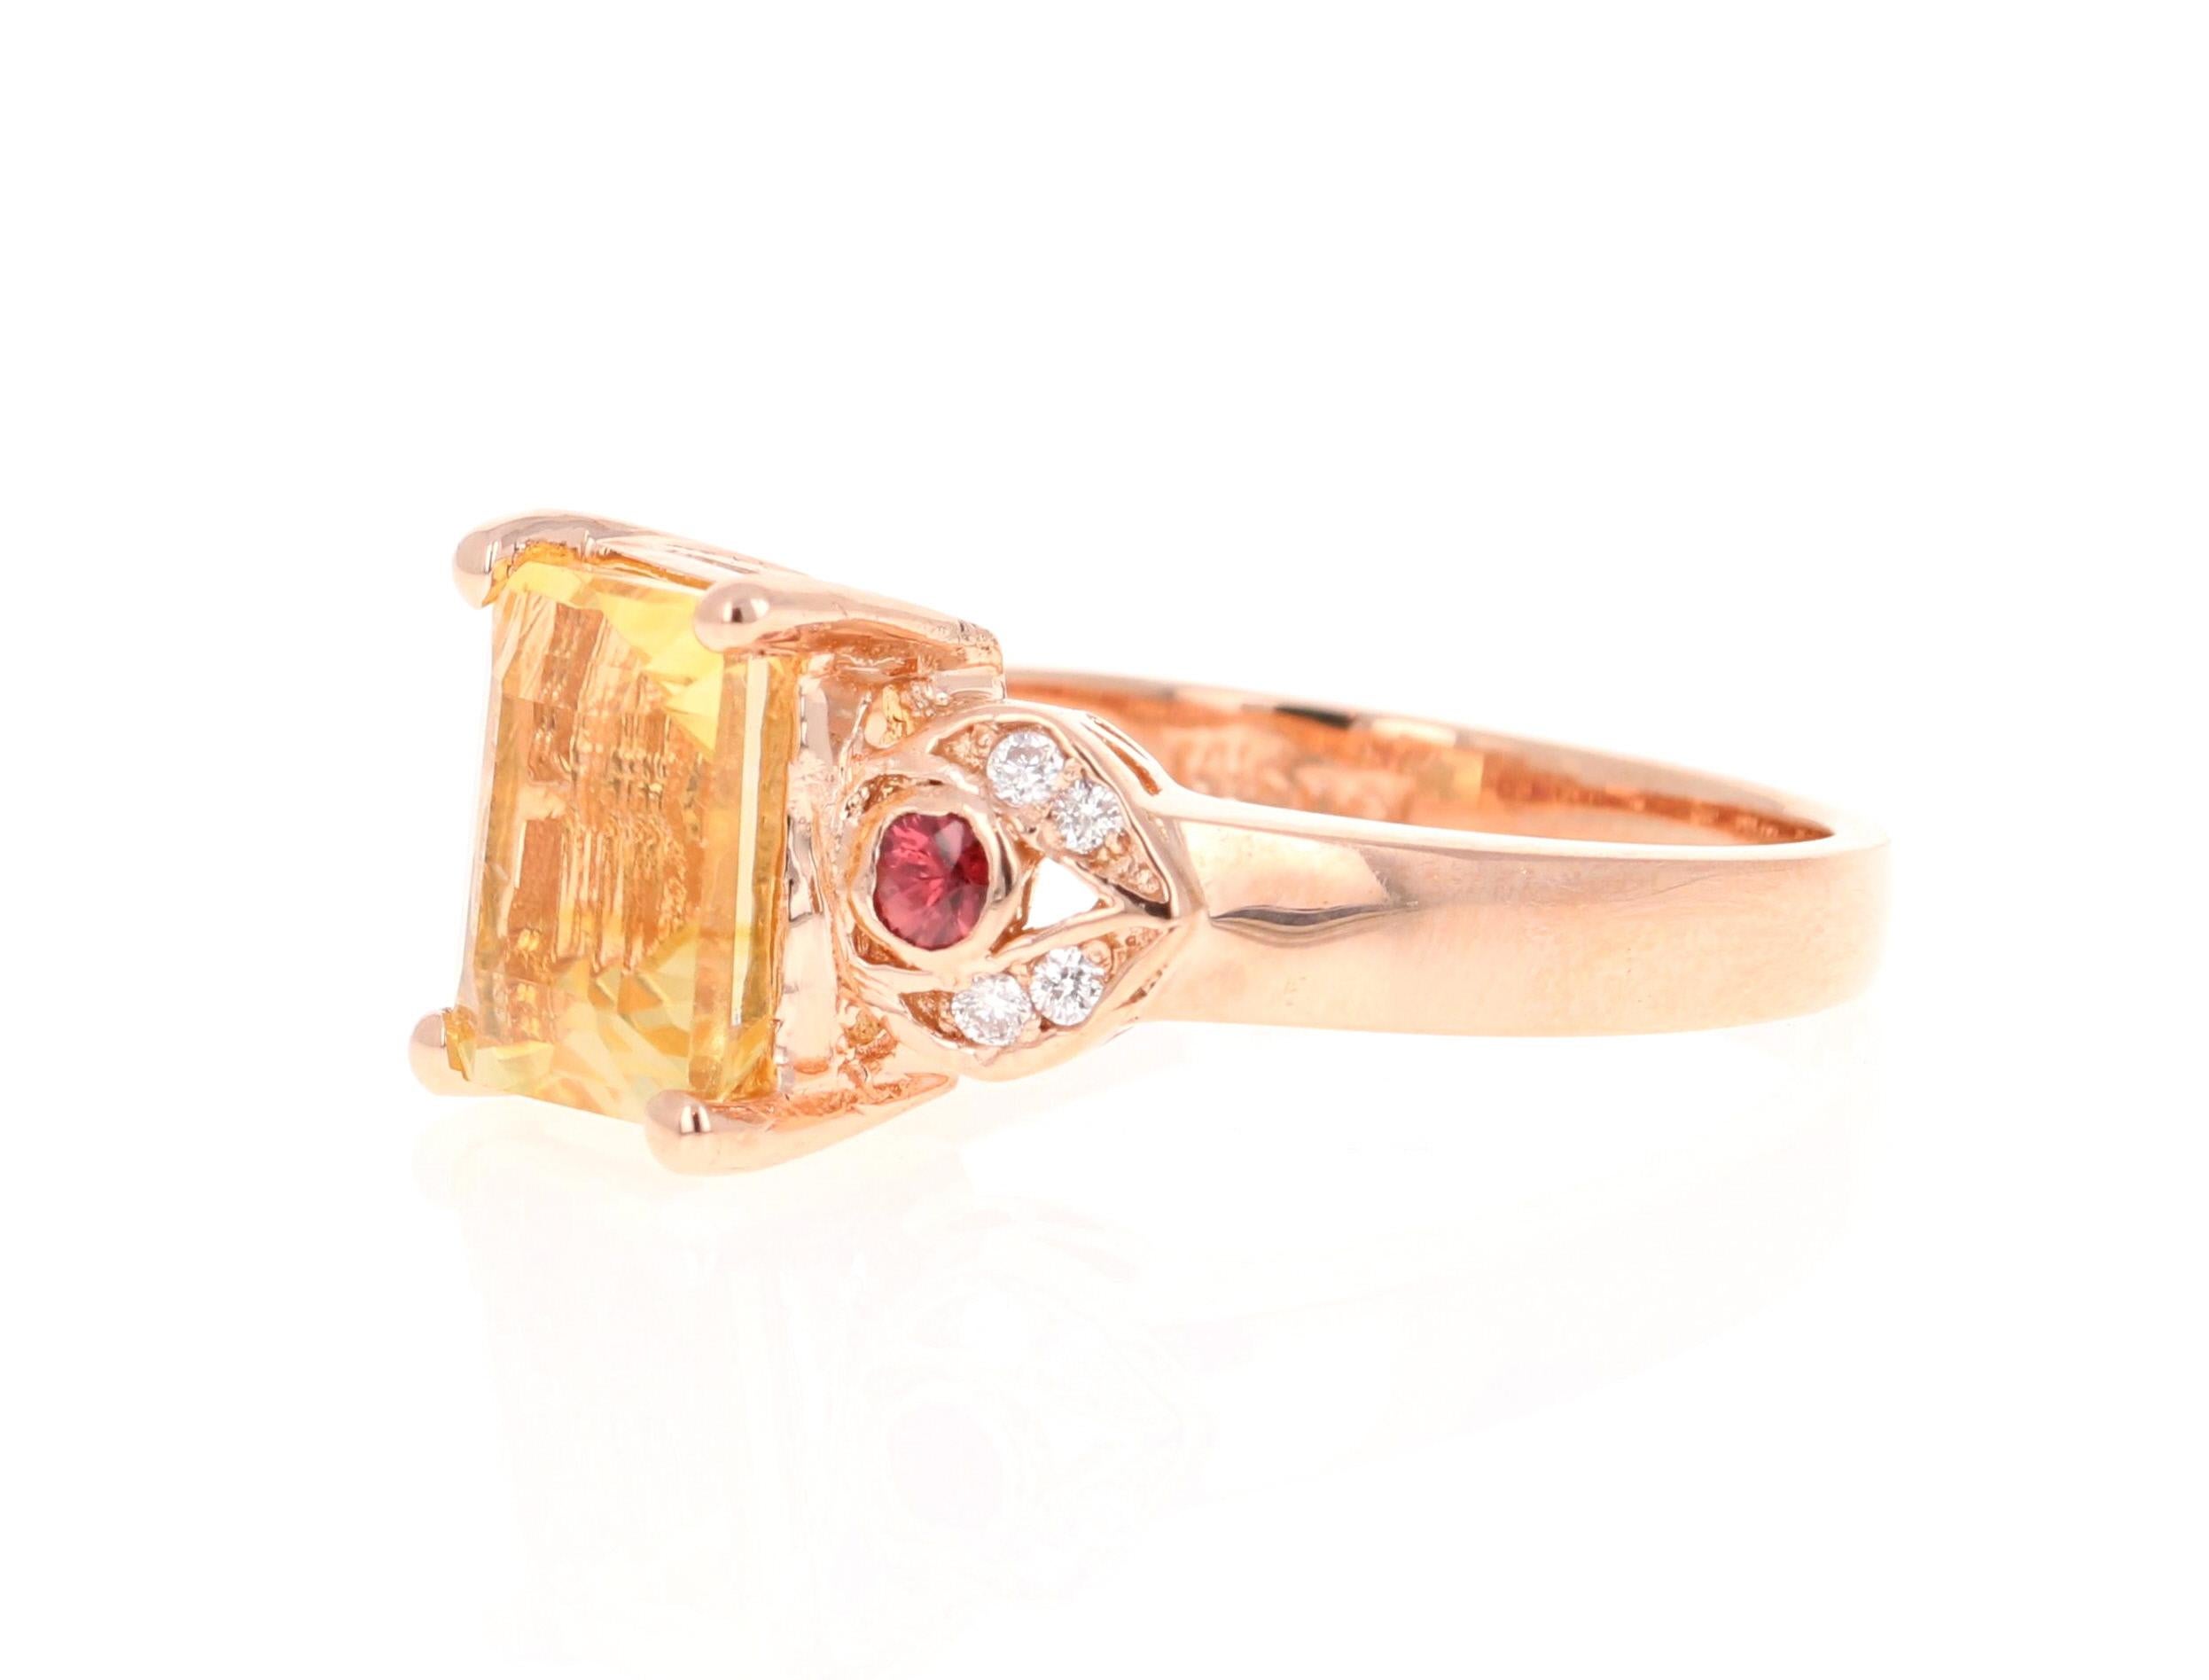 2.45 Carat Citrine Sapphire Diamond Rose Gold Engagement Ring

This gorgeous ring has a beautiful Emerald Cut Citrine Quartz weighing 2.24 Carats and is surrounded by a total of 2 Red Sapphires weighing 0.13 Carats and 8 Round Cut Diamonds weighing